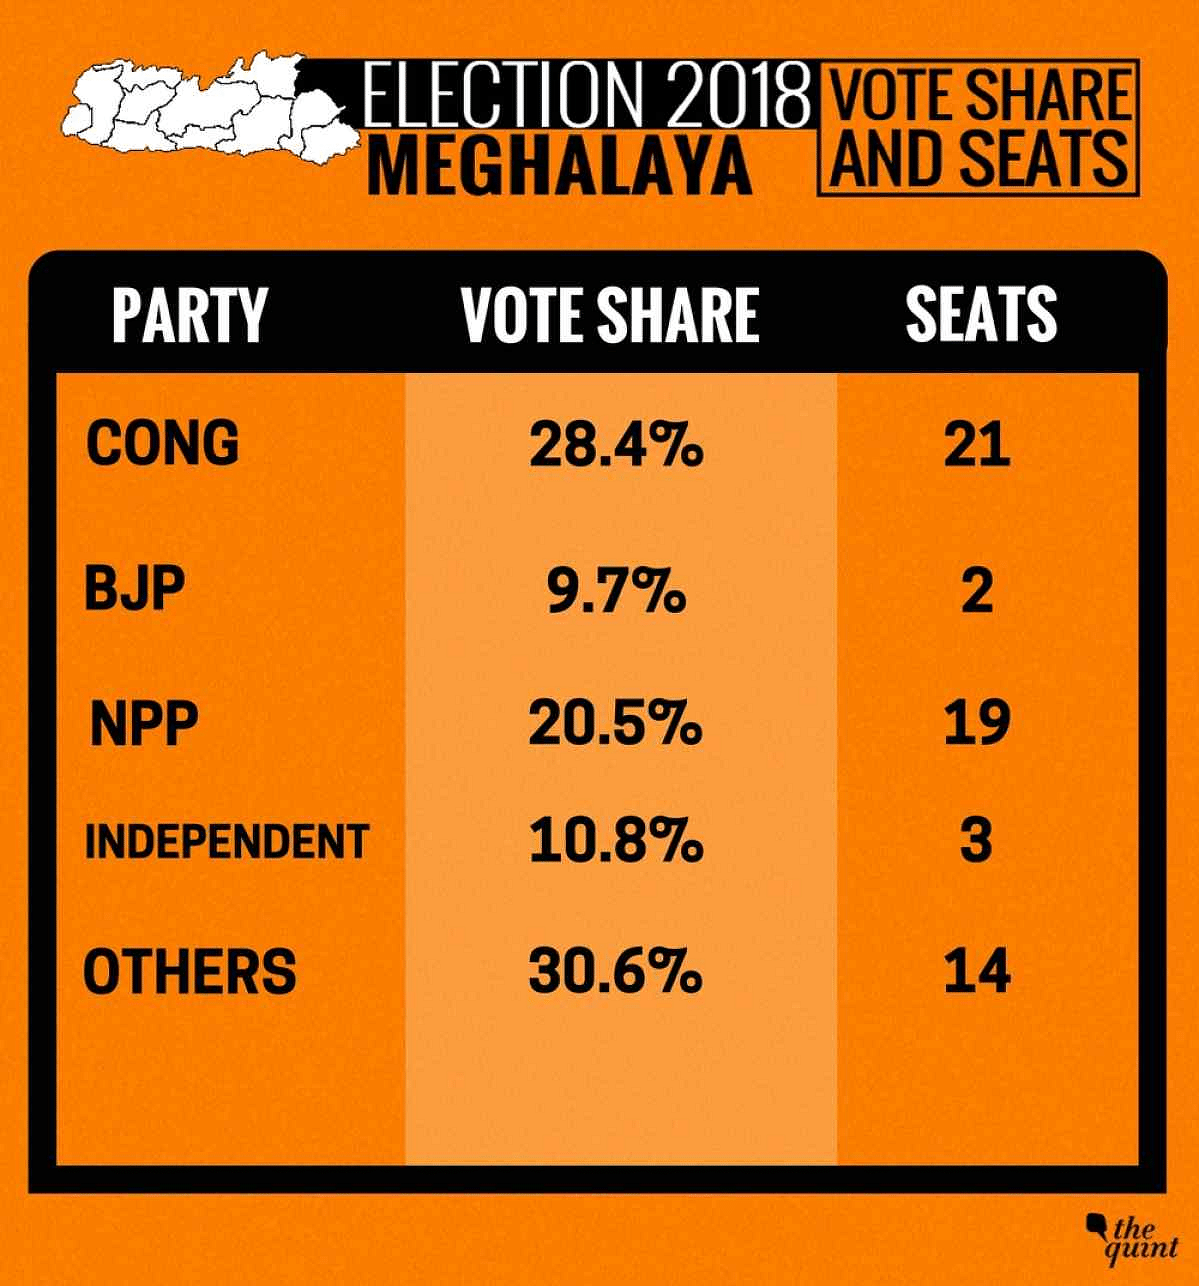 All eyes were on the BJP as results for Tripura, Meghalaya and Nagaland elections were declared on 3 March.